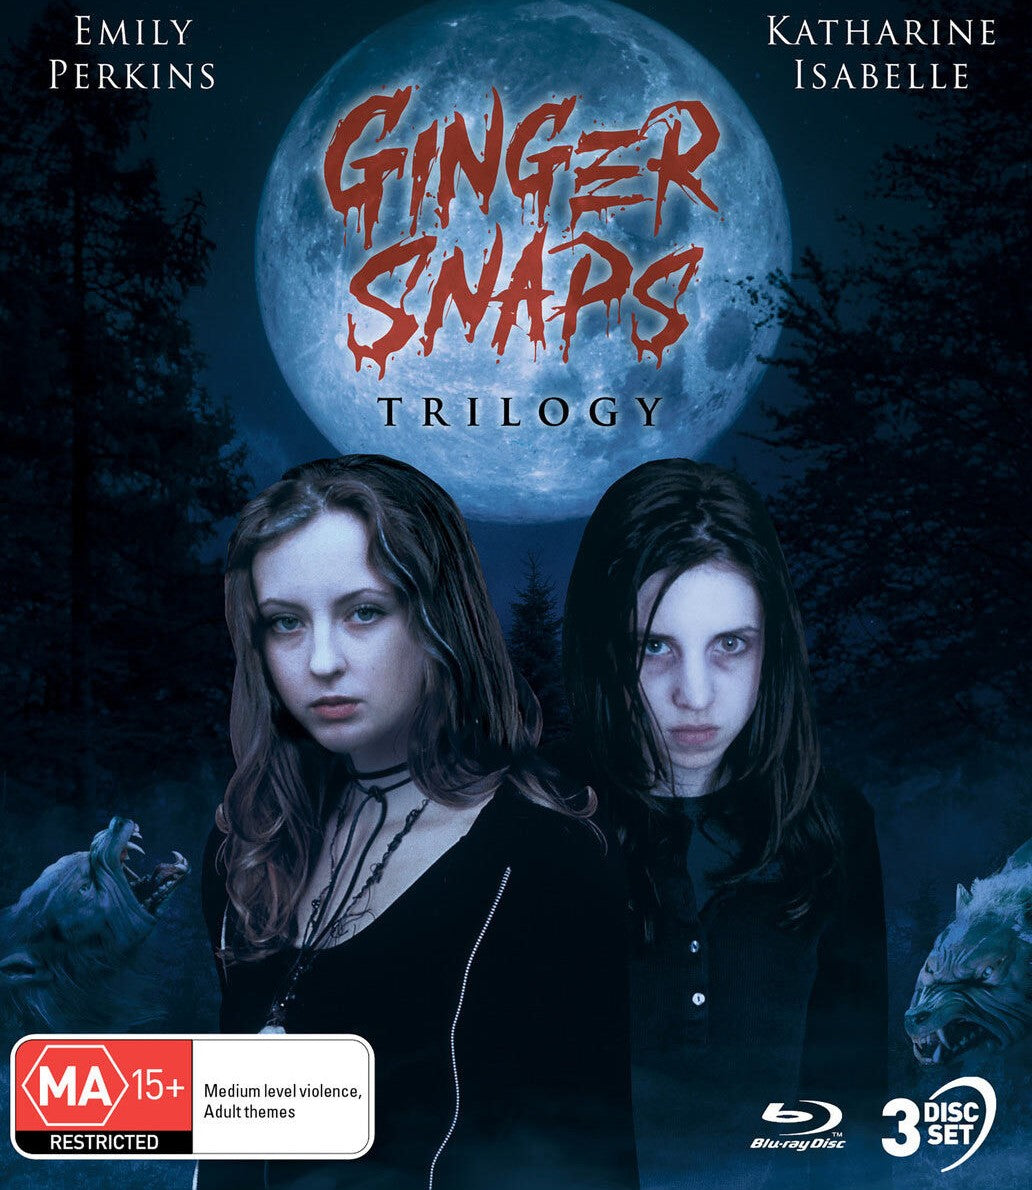 GINGER SNAPS TRILOGY (REGION FREE IMPORT) BLU-RAY